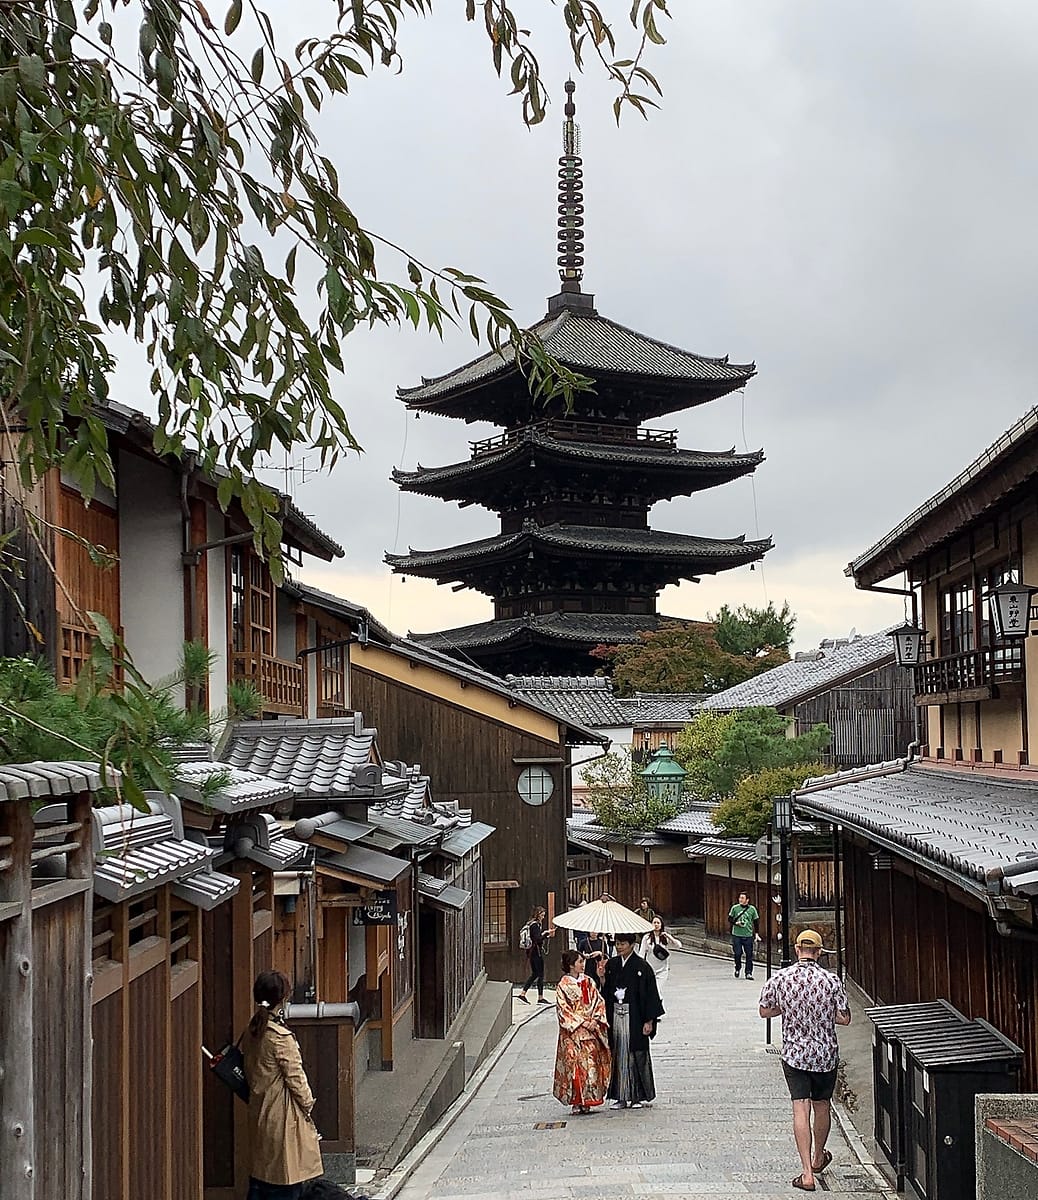 A pagoda in the Higashiyama District of Kyoto Japan with a bride and groom in the foreground